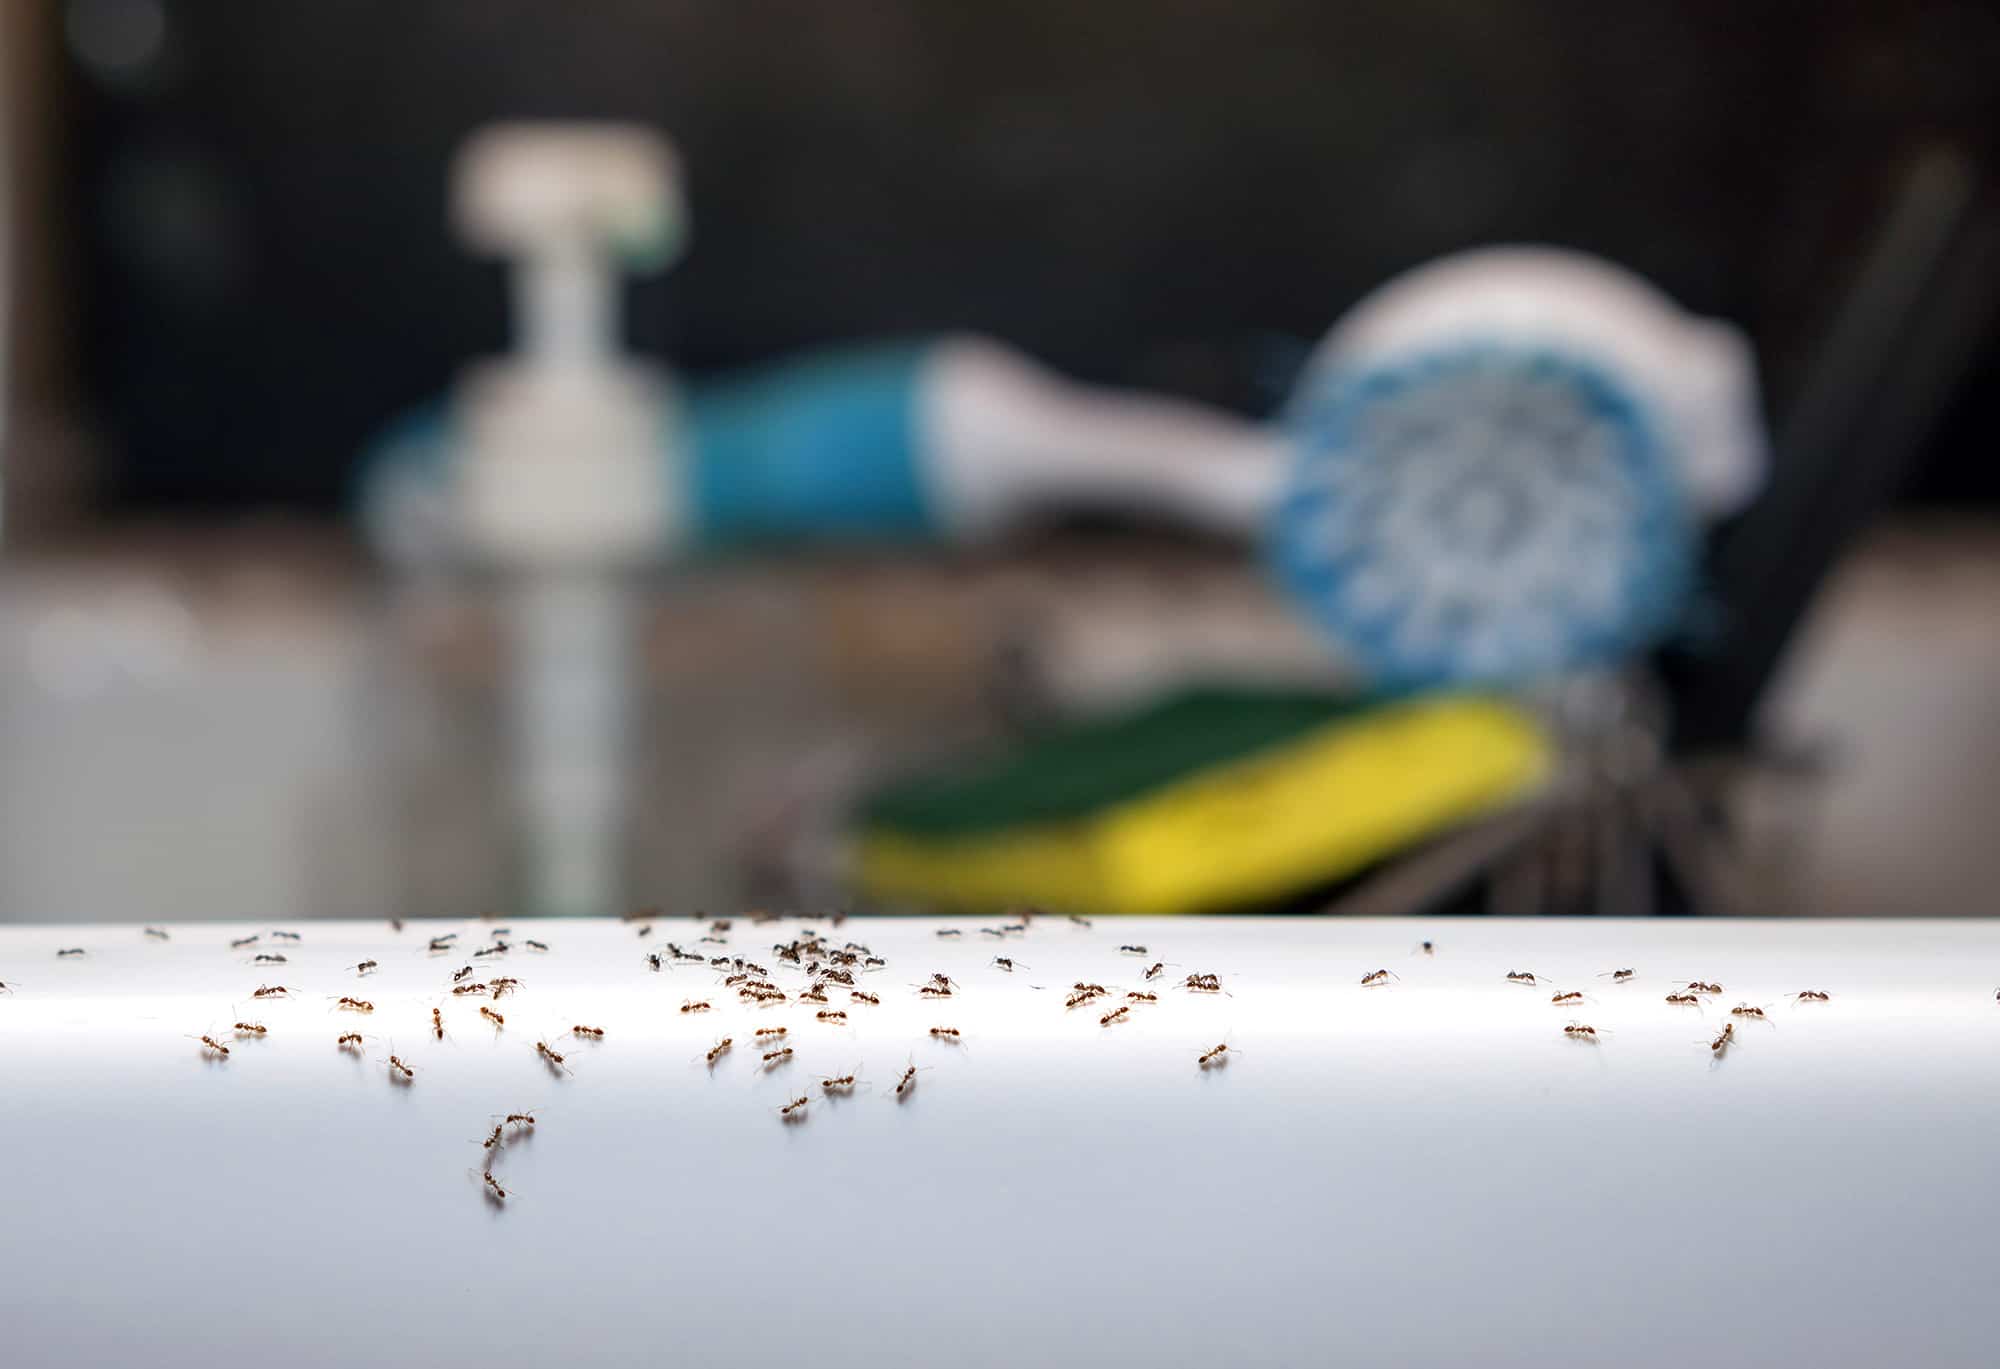 Image of ants in the kitchen sink